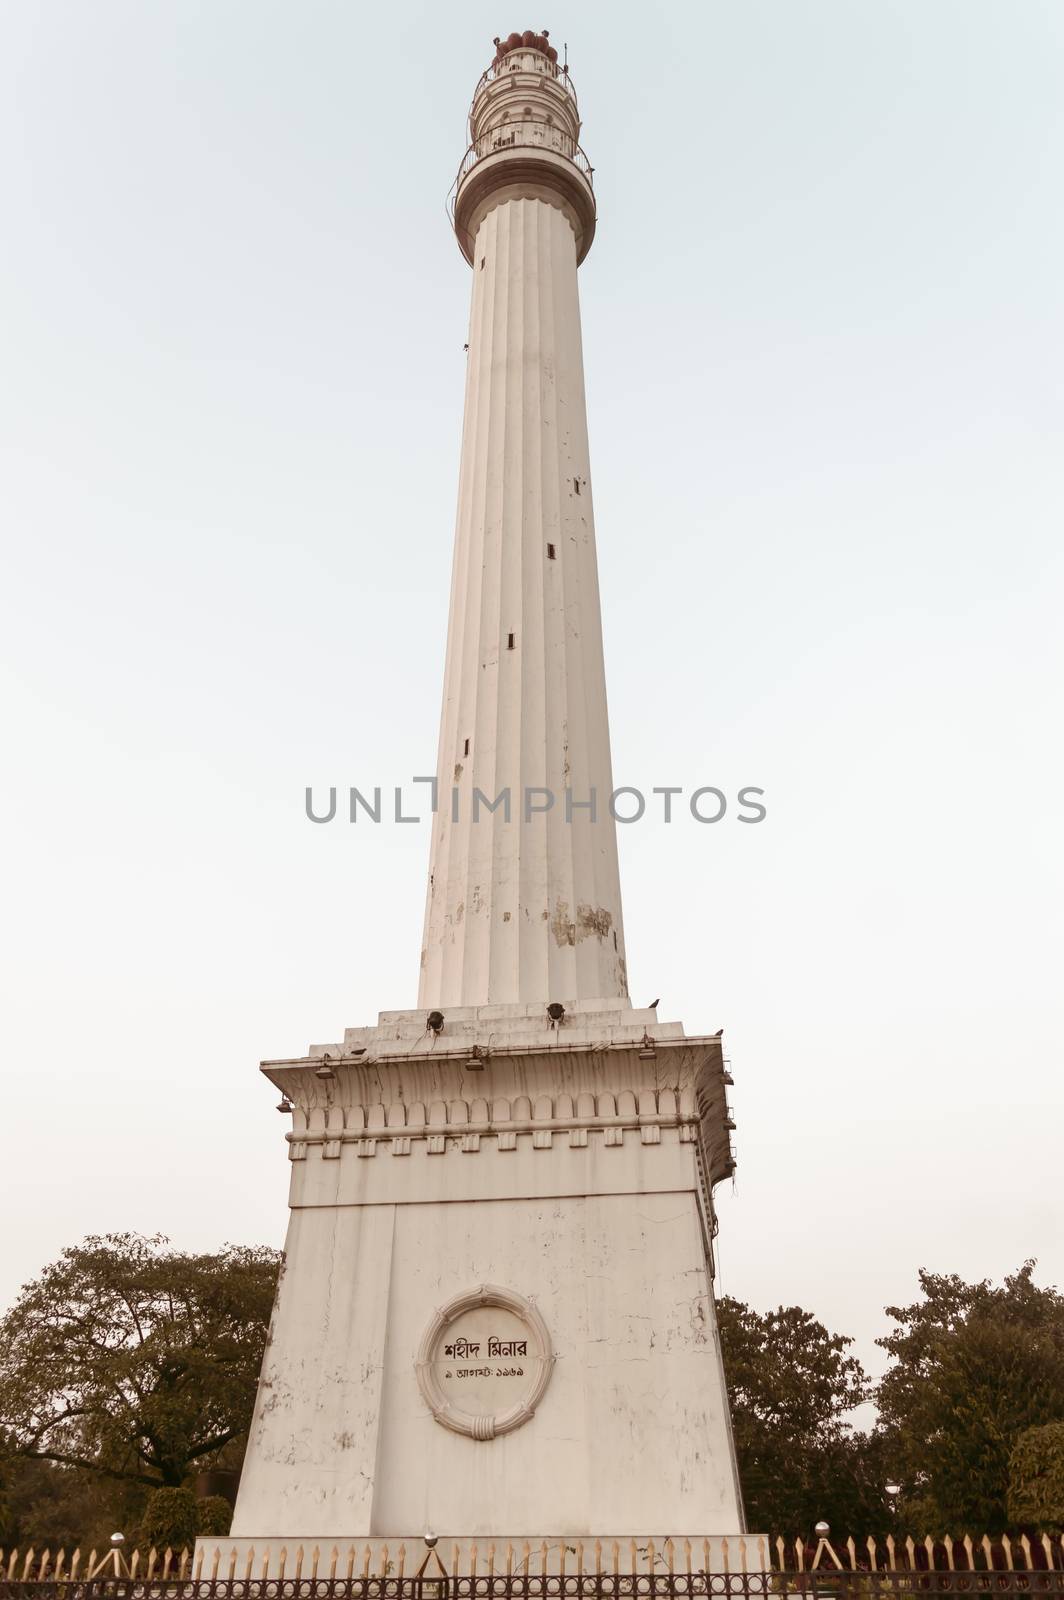 Shaheed Minar Martyrs Ochterlony Monument, famous pillar minaret architectural column lighthouse representing memory British East India Company victory over Nepalese War, Kolkata West Bengal May 2019.